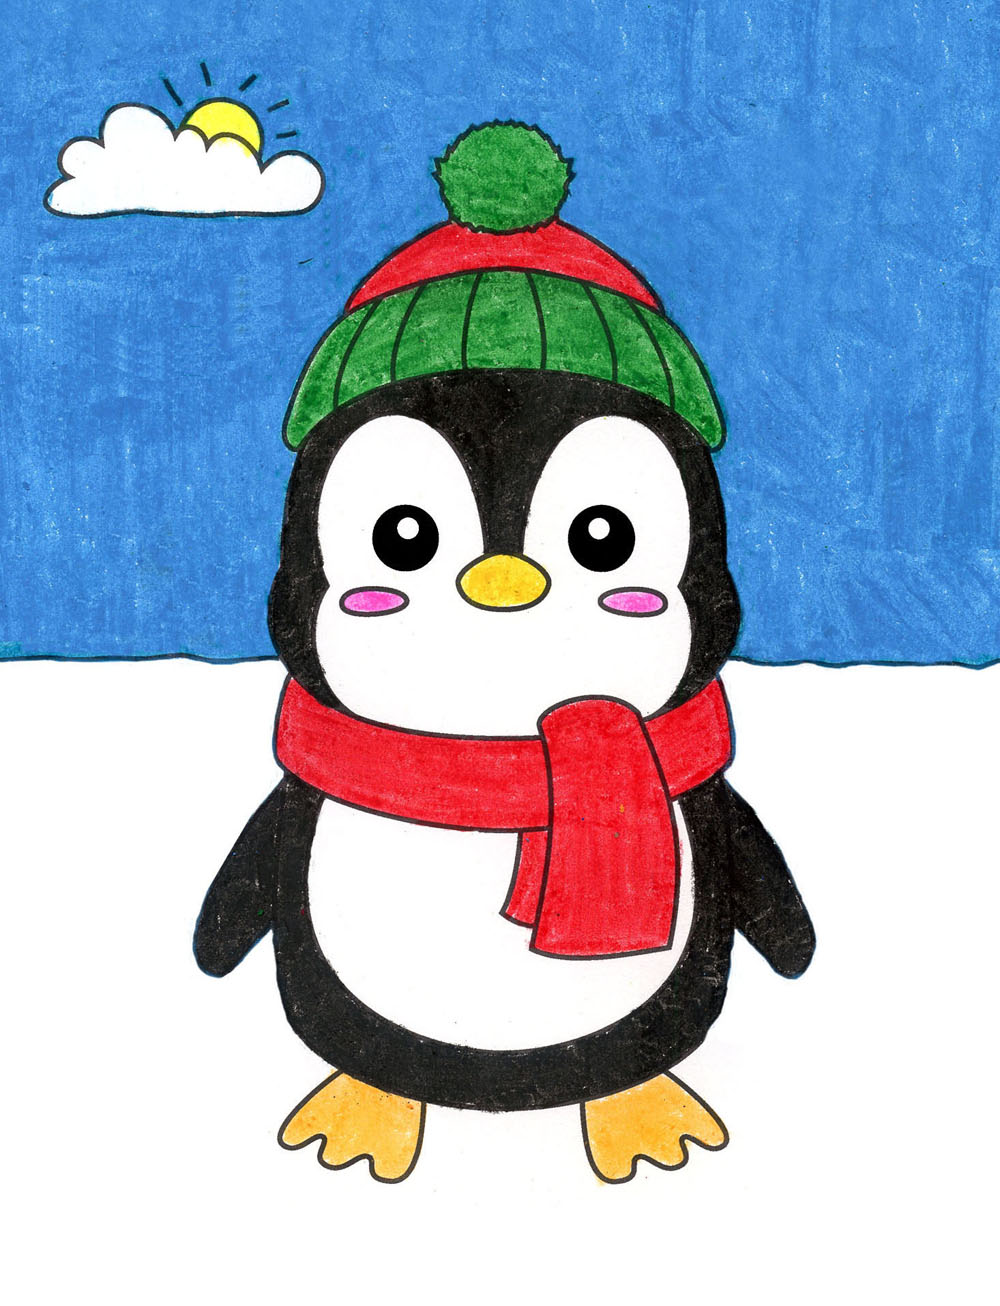 Easy How to Draw a Cute Penguin Tutorial, Penguin Coloring Page